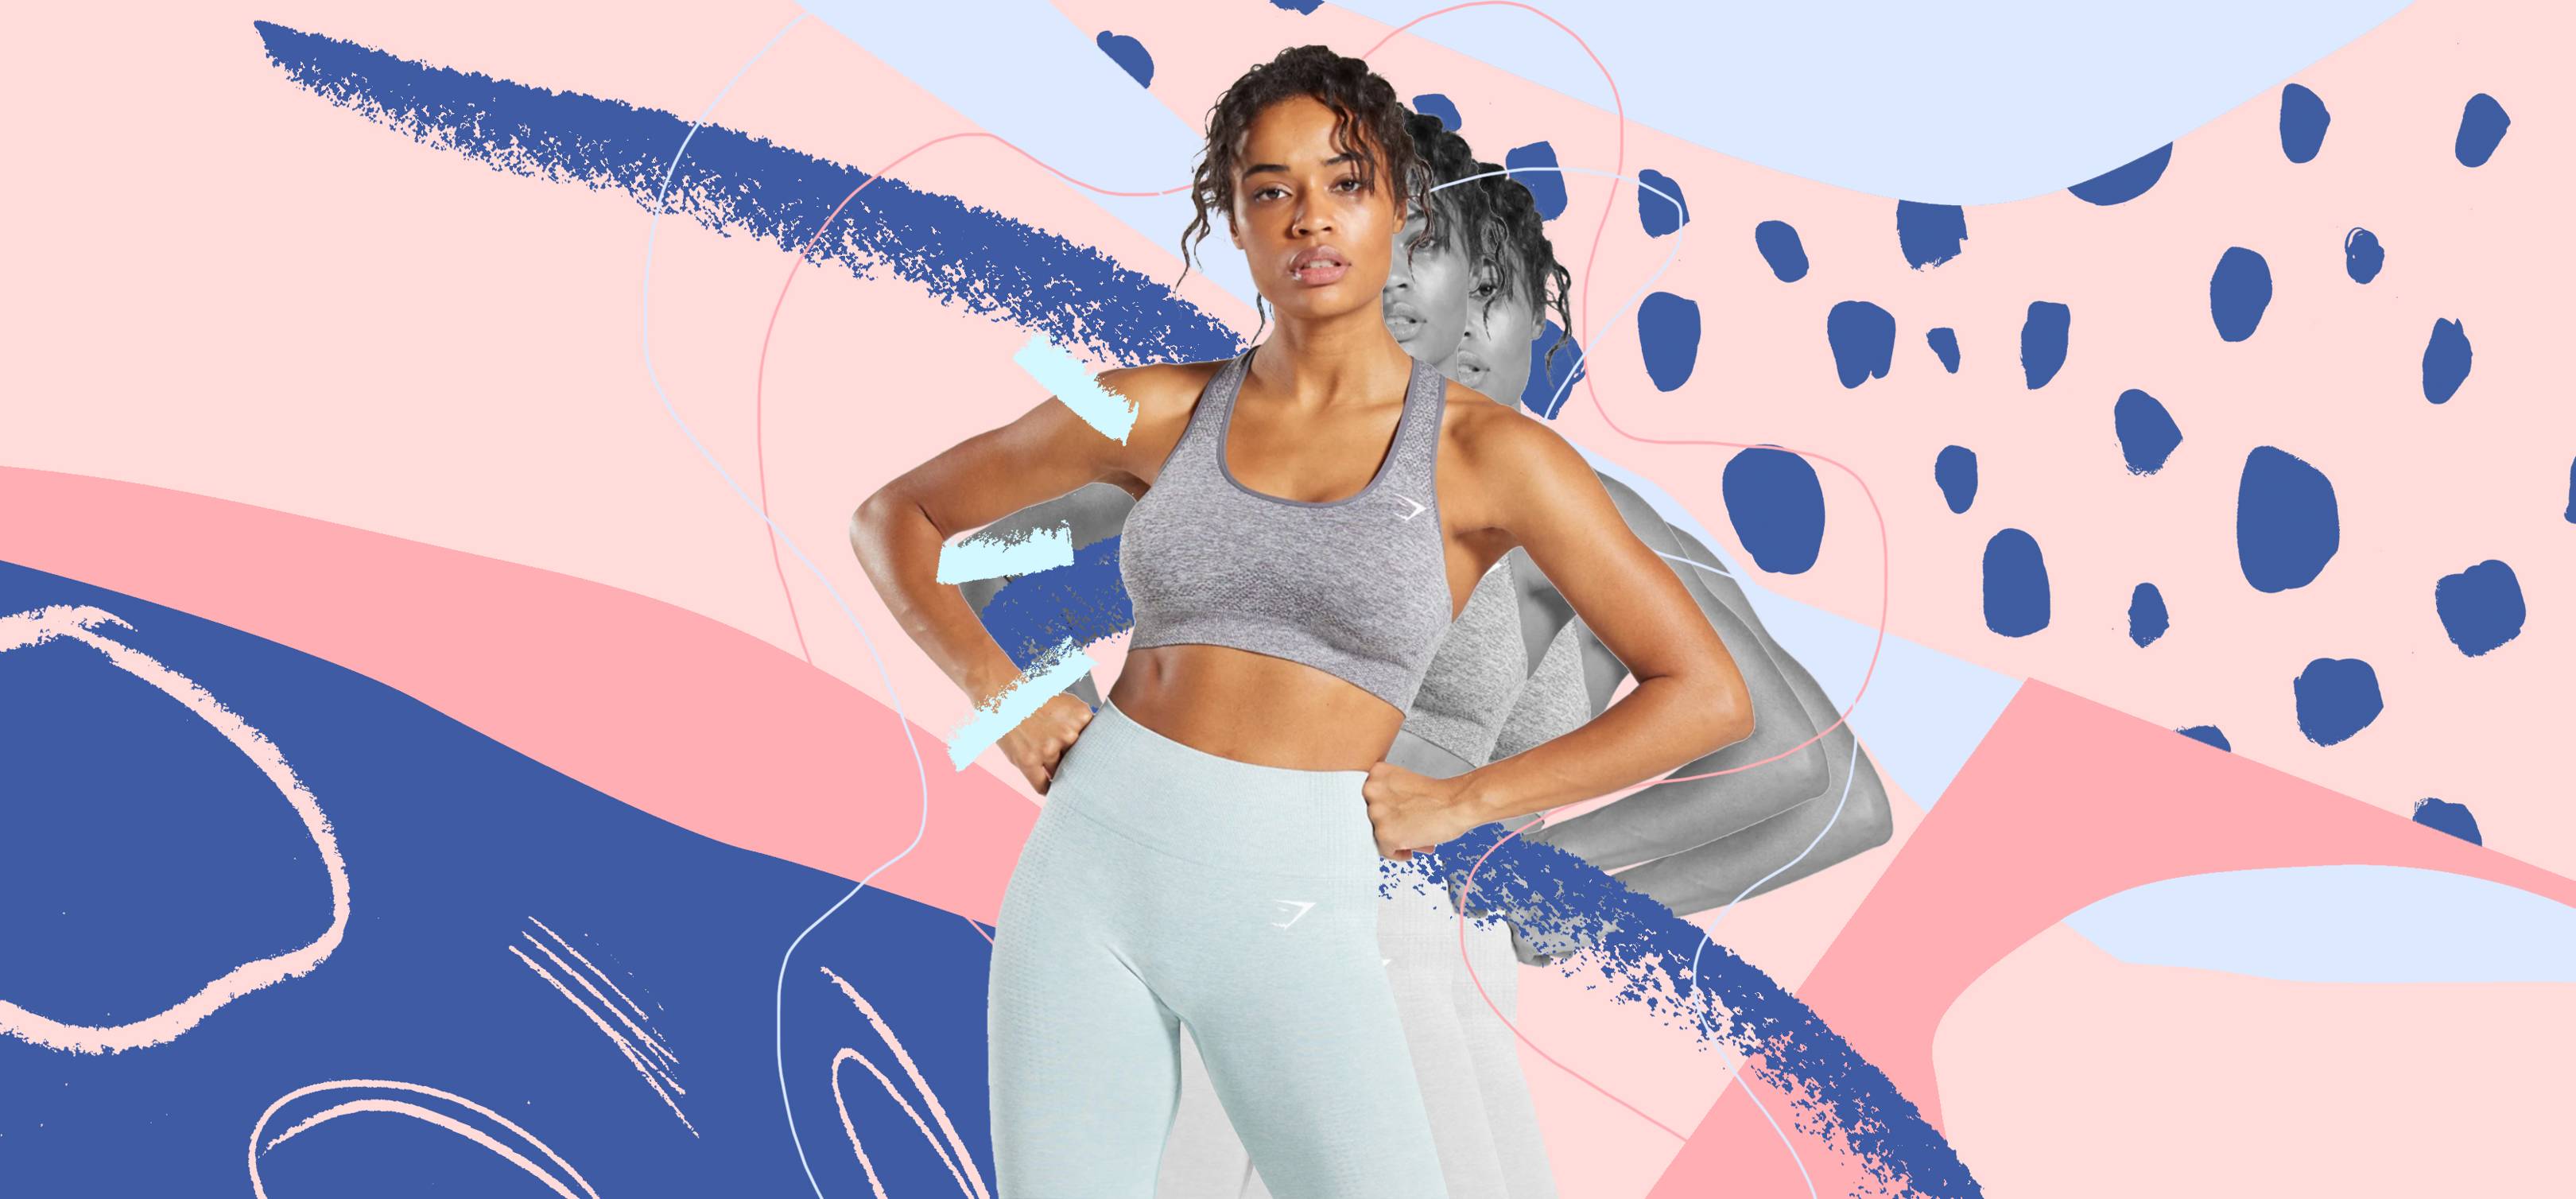 25 Best Sports Bras For Gym Yoga Running In 2021 Glamour Uk